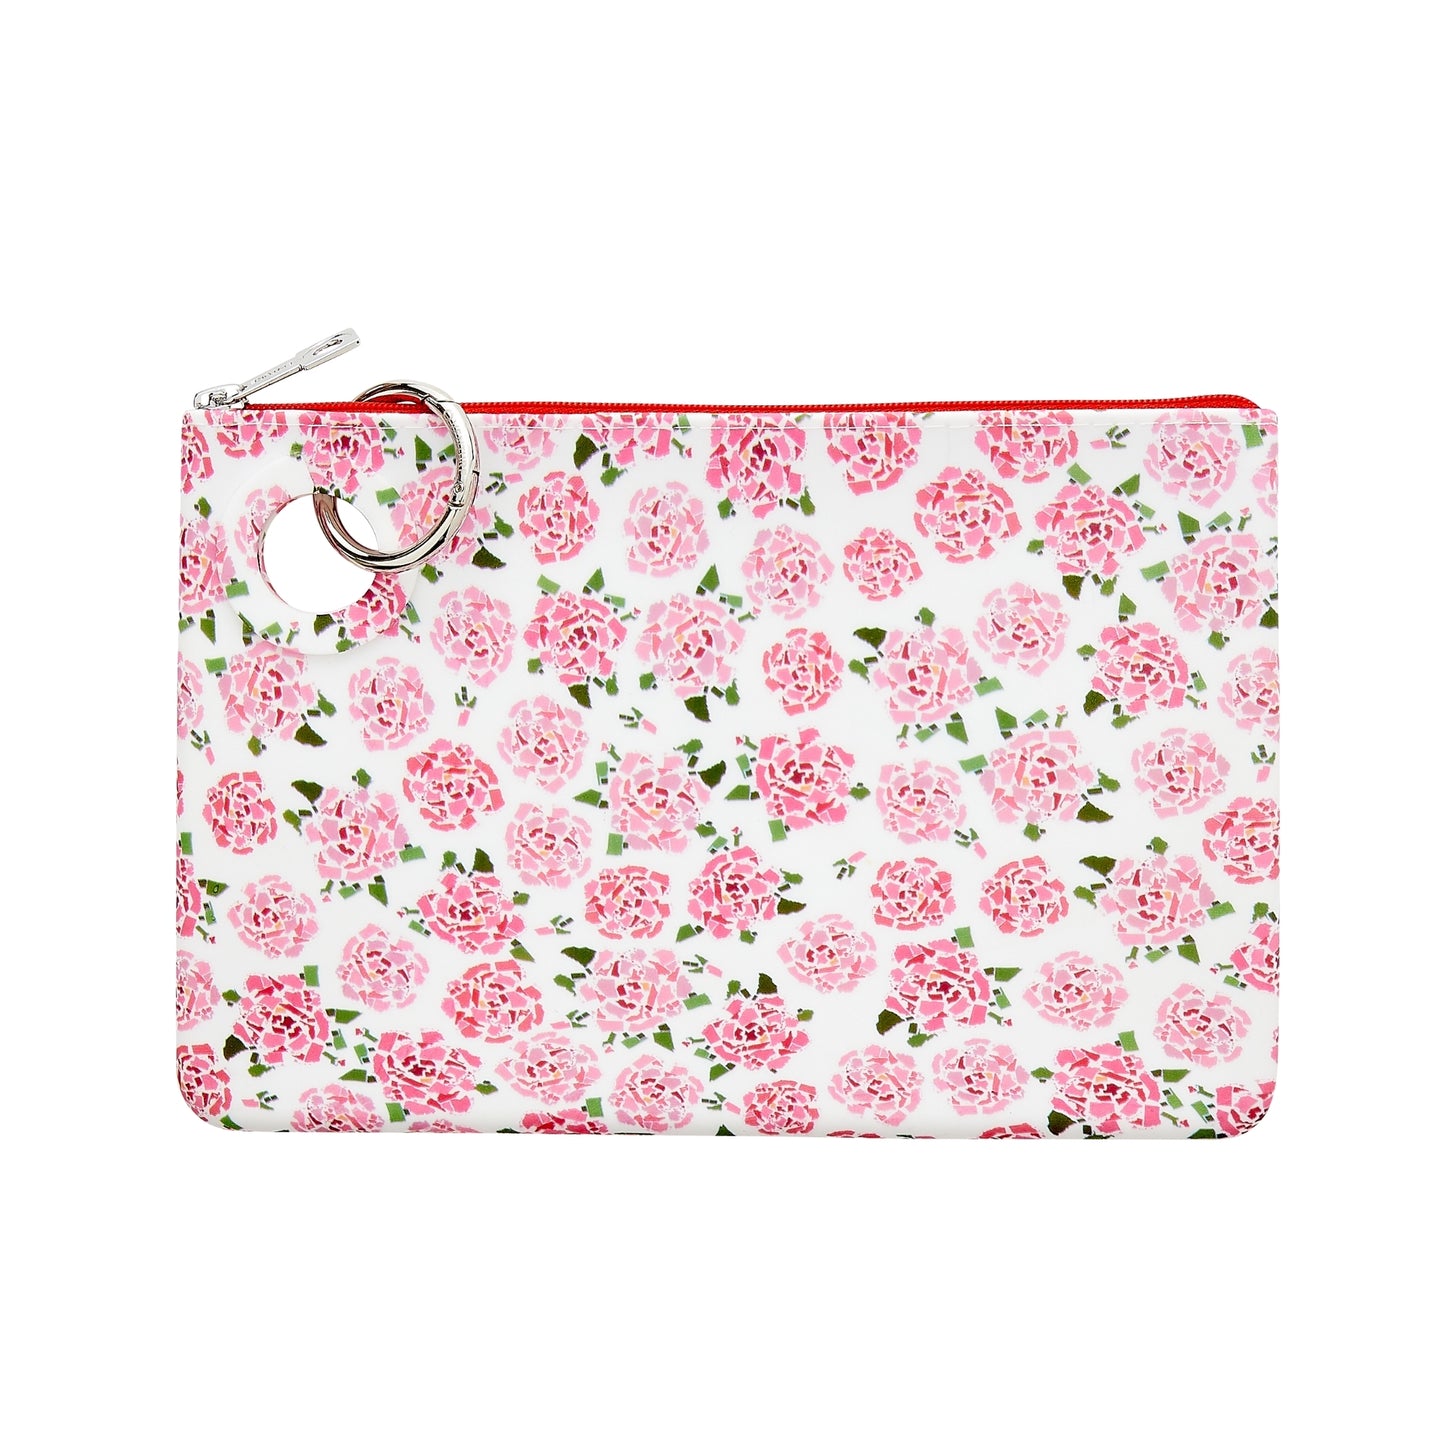 Large Silicone Pouch white background with pink peony print.  The peony is made up of the Fifty states shapes.